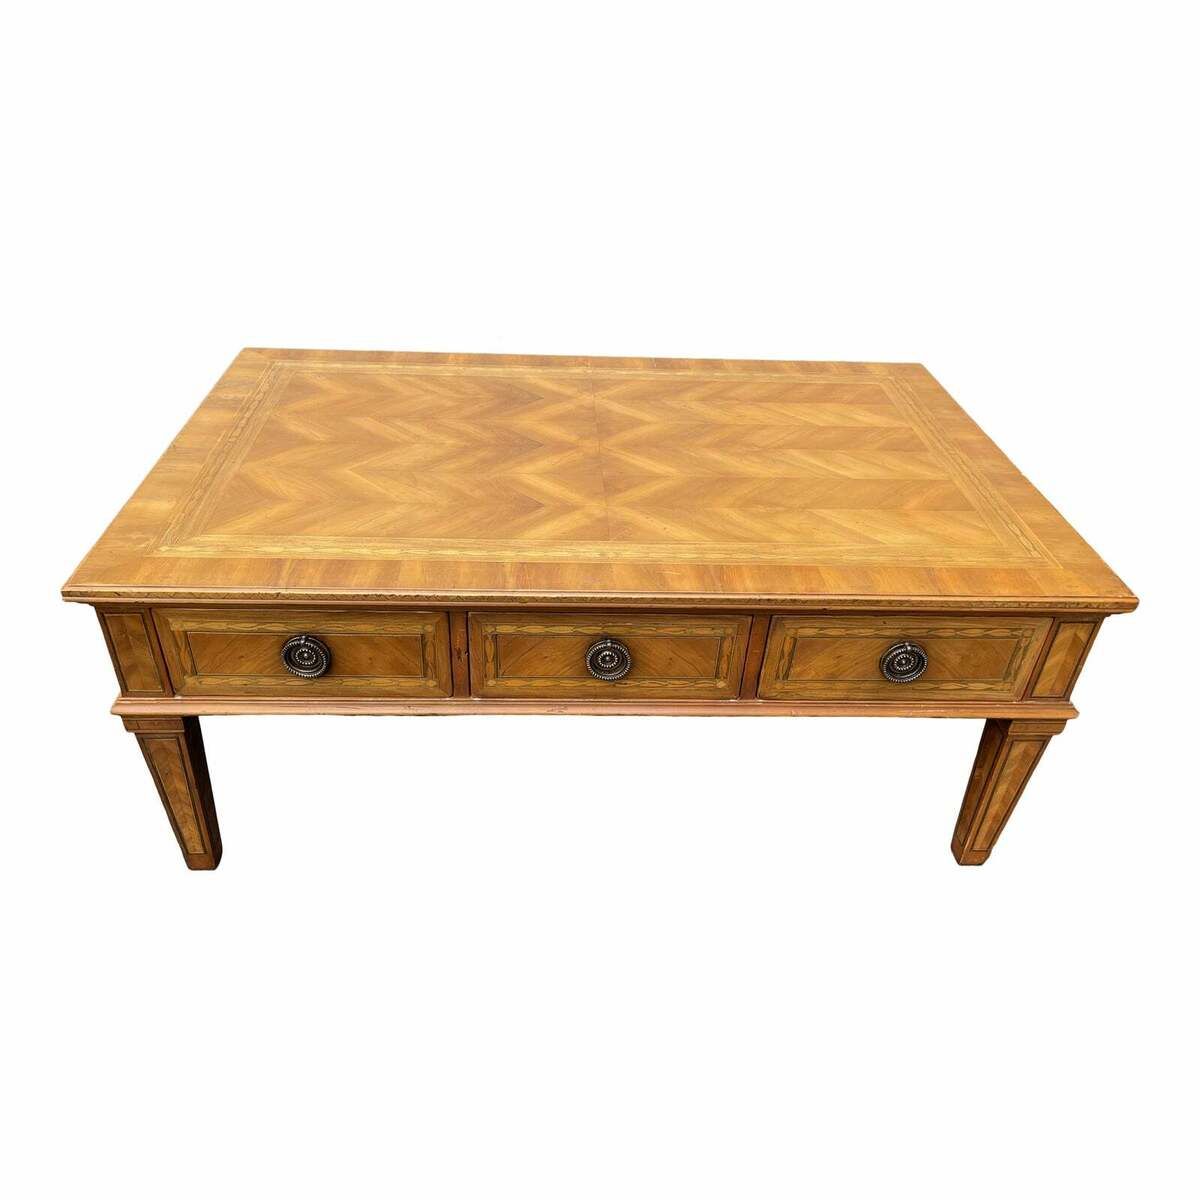 Alfonso Marina Ebanista Rectangular Inlaid Fruitwood Coffee Table | Ebay Throughout Pemberly Row Replicated Wood Coffee Tables (View 3 of 11)